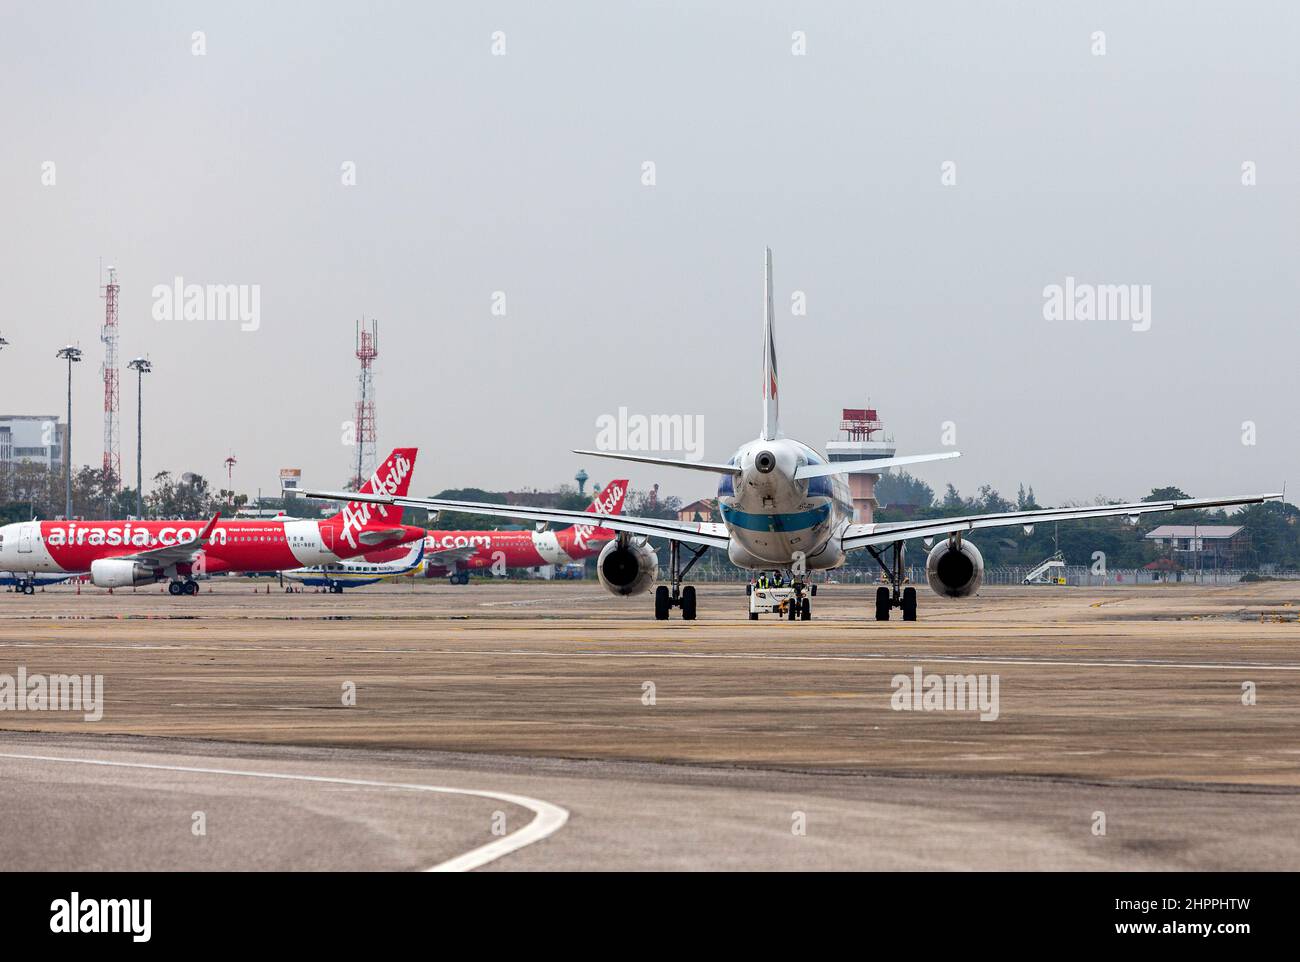 Chiang Mai, Thailand. 22nd Feb, 2022. Bangkok Airways airplane (R) and Thai AirAsia airplane (L) seen on the apron at Chiang Mai International Airport (CNX). Thailand has raised the COVID-19 alert to level 4 following a sharp increase in omicron variant infections nationwide. (Photo by Pongmanat Tasiri/SOPA Images/Sipa USA) Credit: Sipa USA/Alamy Live News Stock Photo